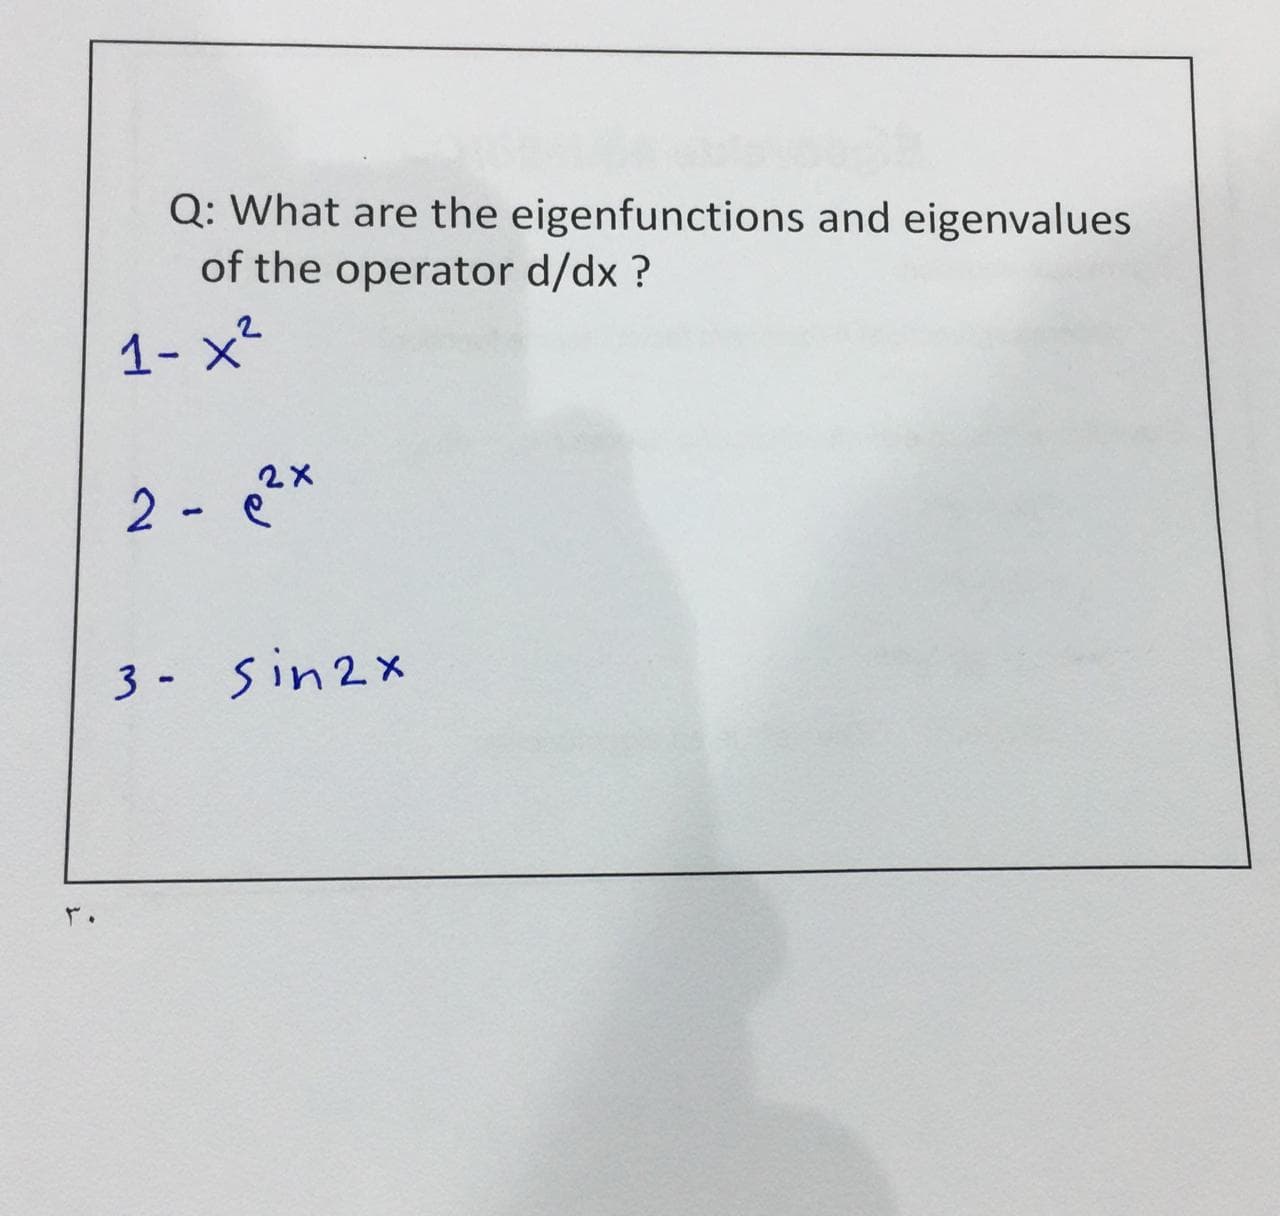 Q: What are the eigenfunctions and eigenvalues
of the operator d/dx ?
2 - *
3 - sin2x
